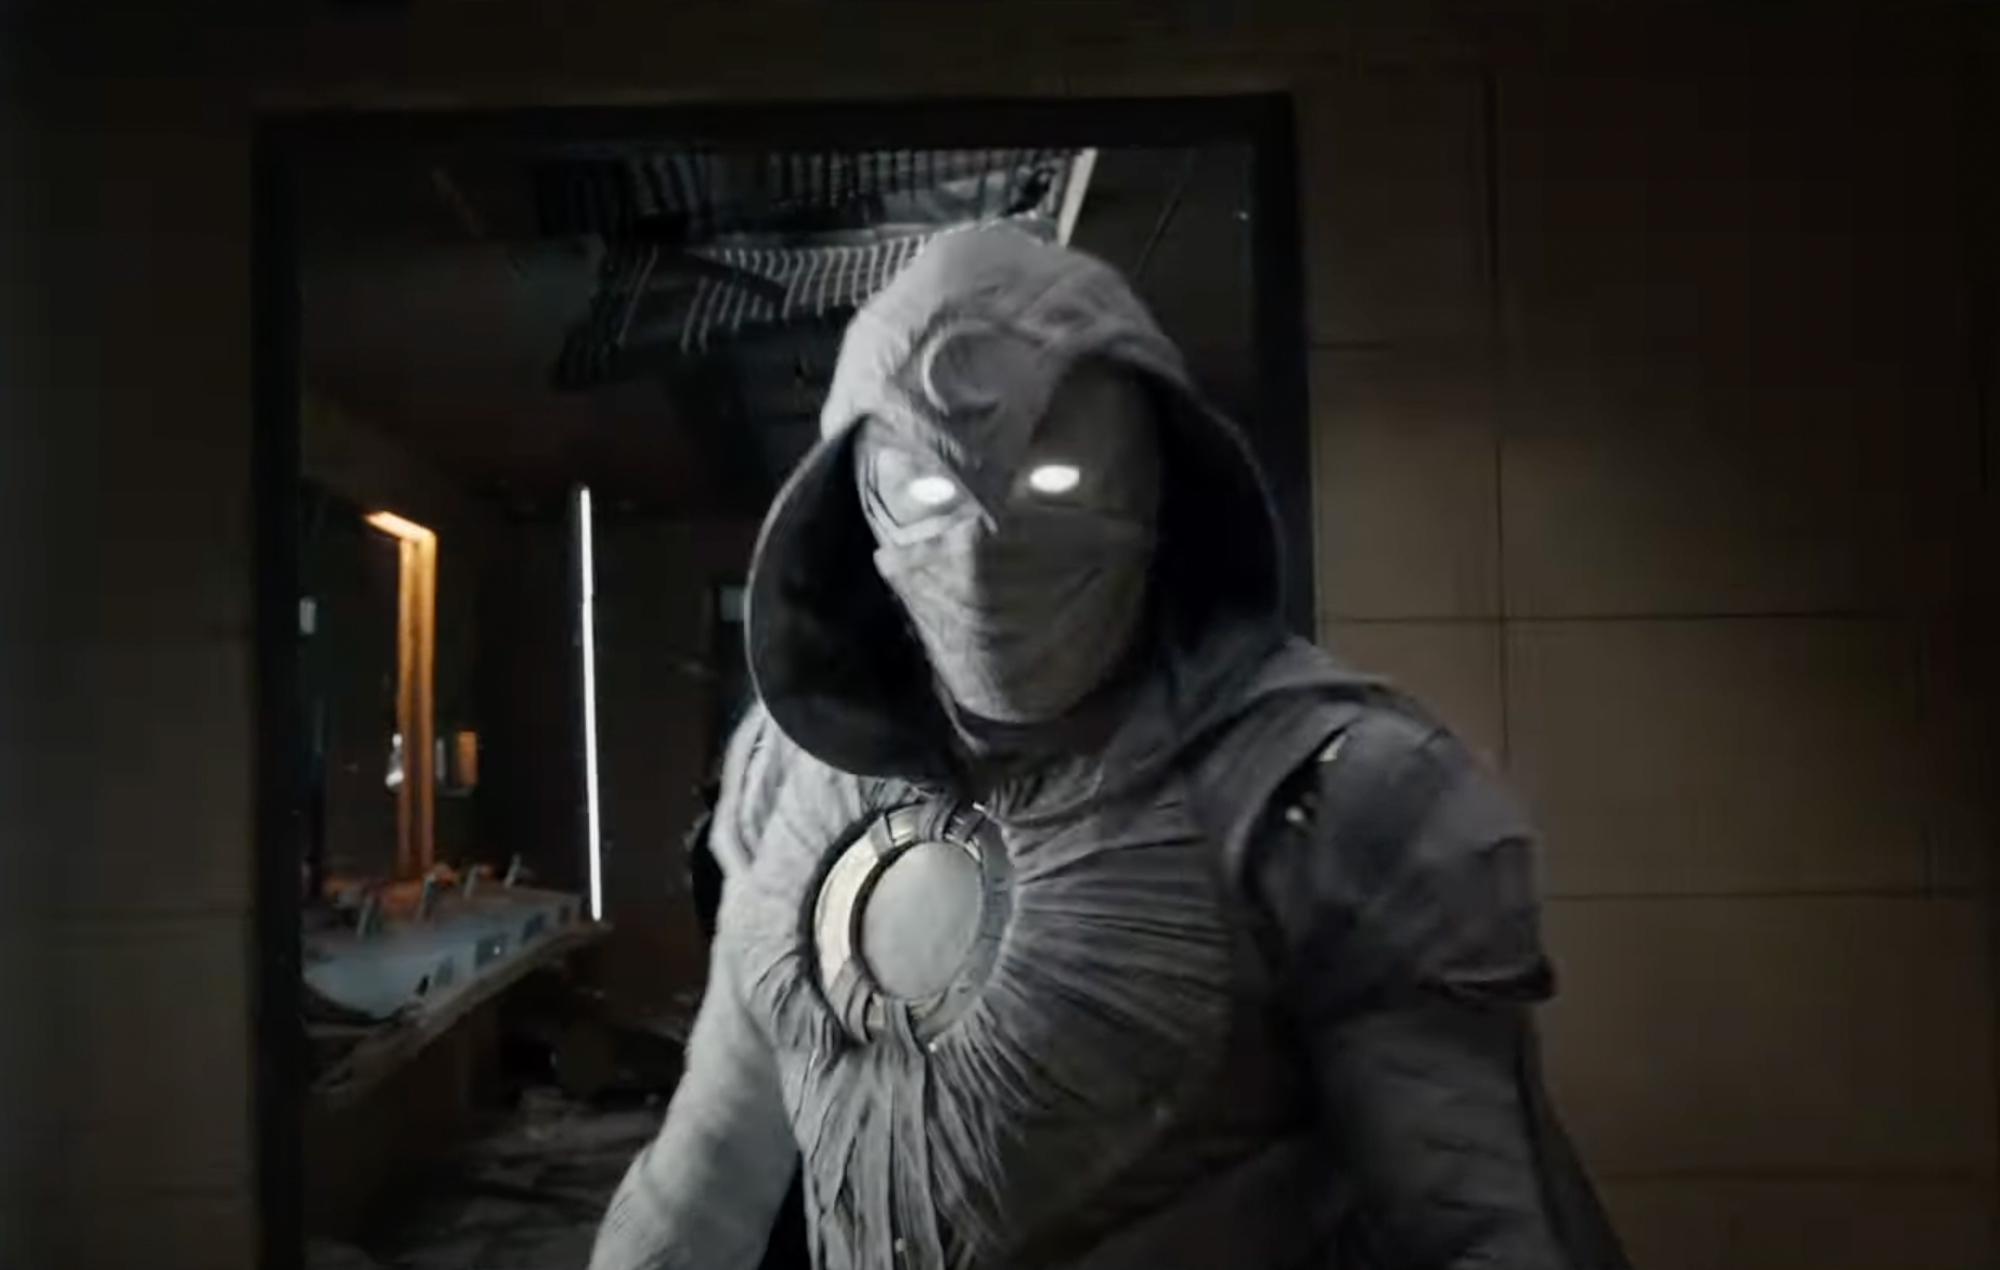 Marvel Moon Knight Finale episode to have twists and turns.